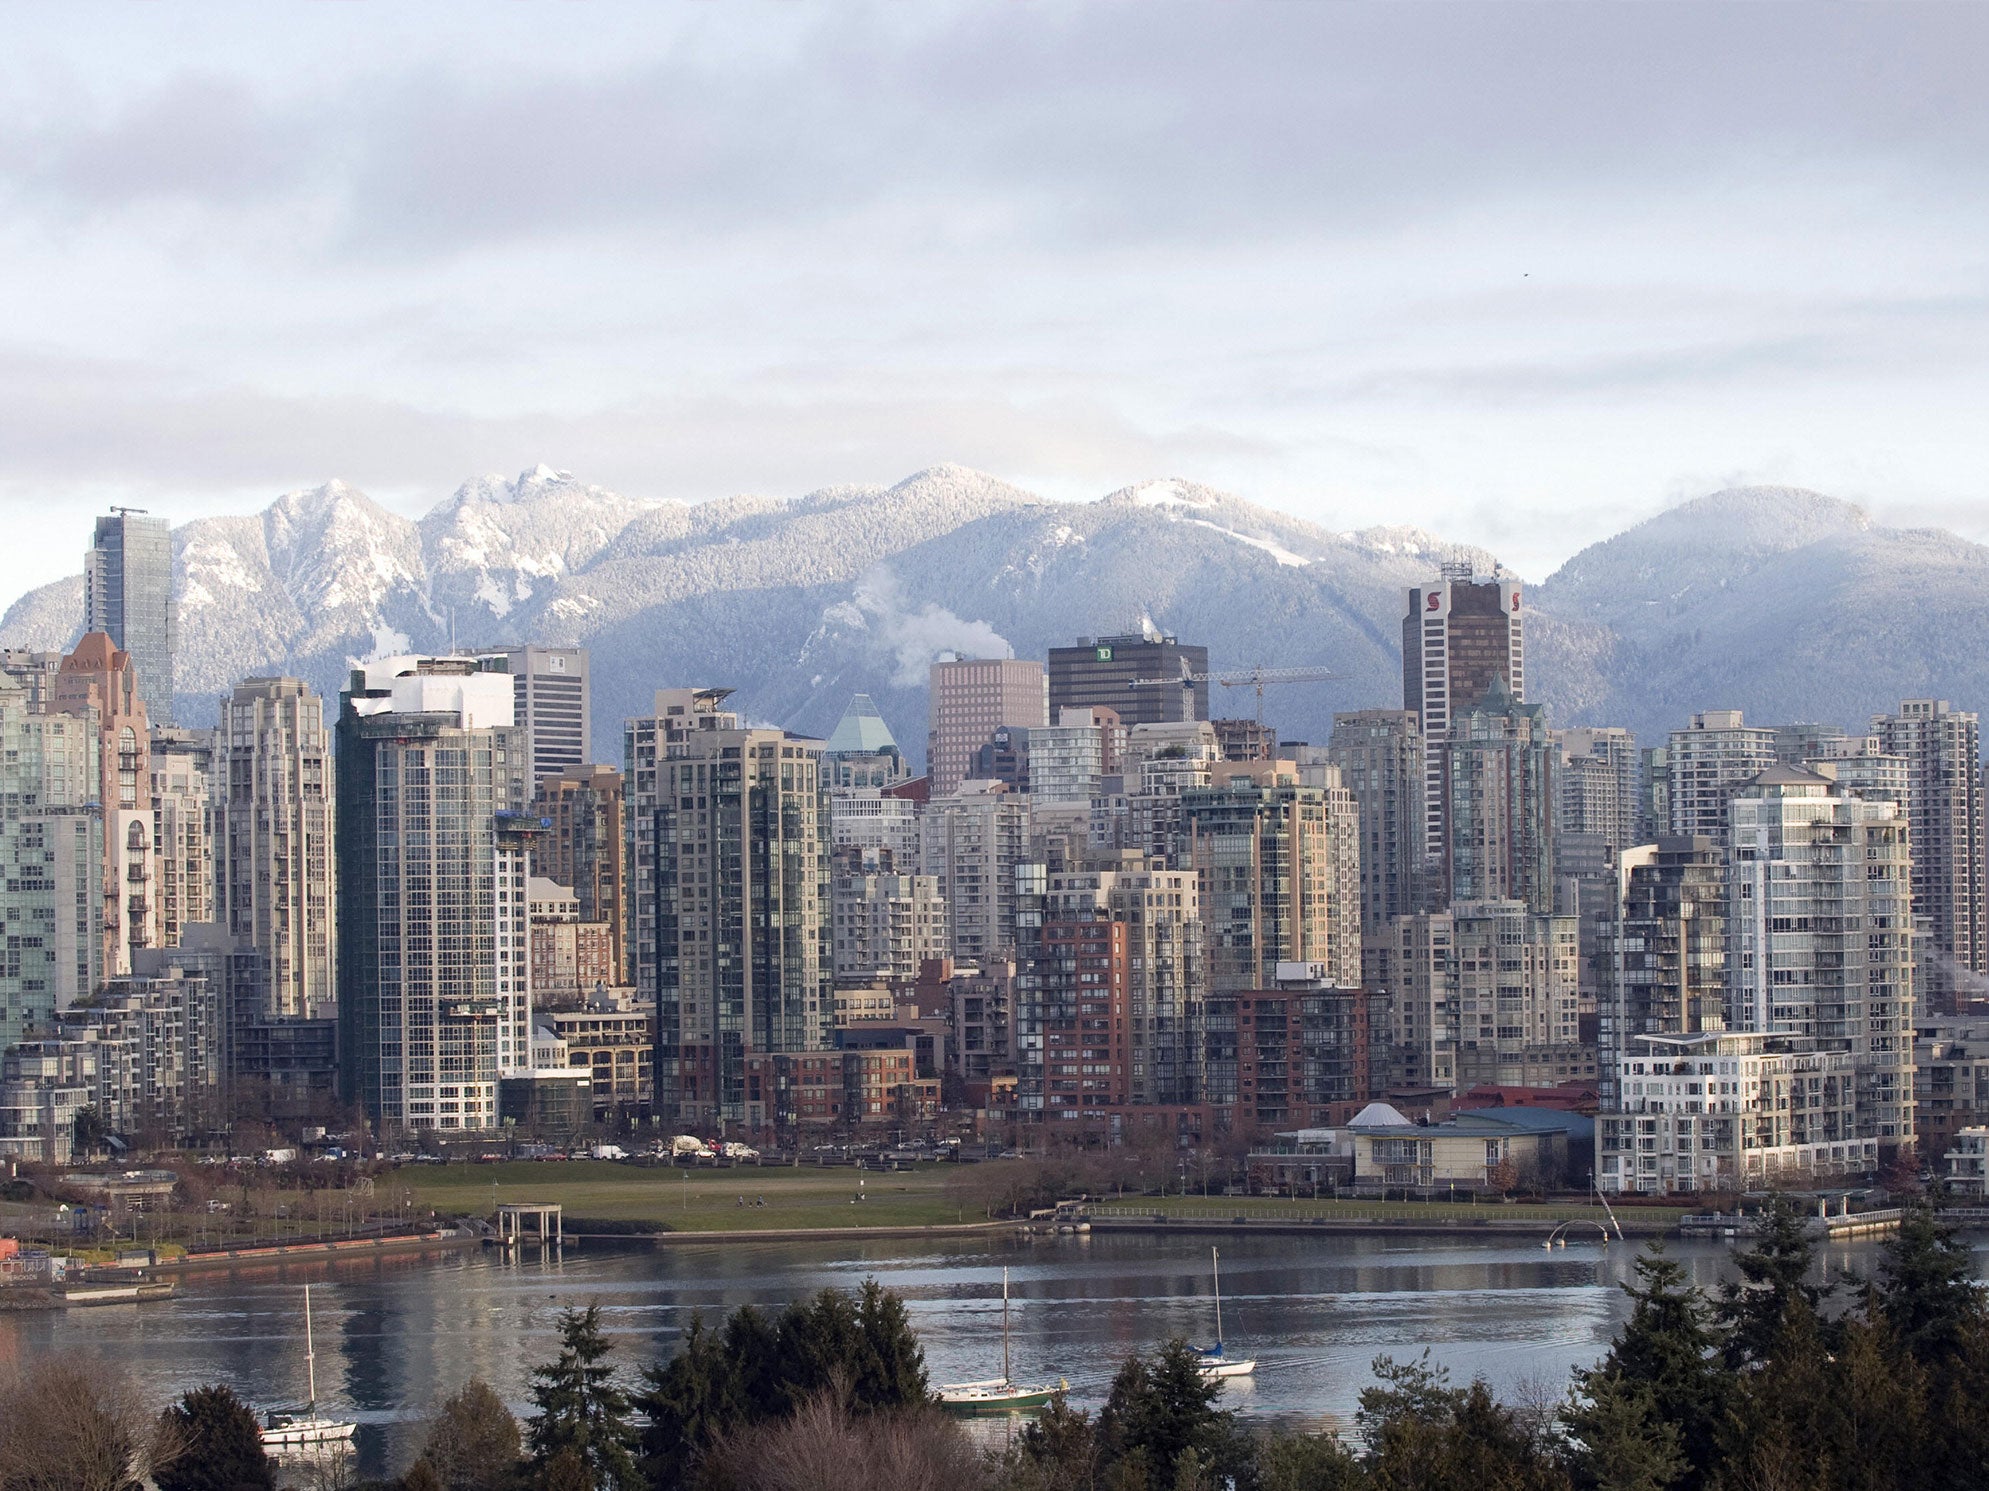 Economy passengers will now earn 75 per cent fewer Avios for a flight from London to Vancouver